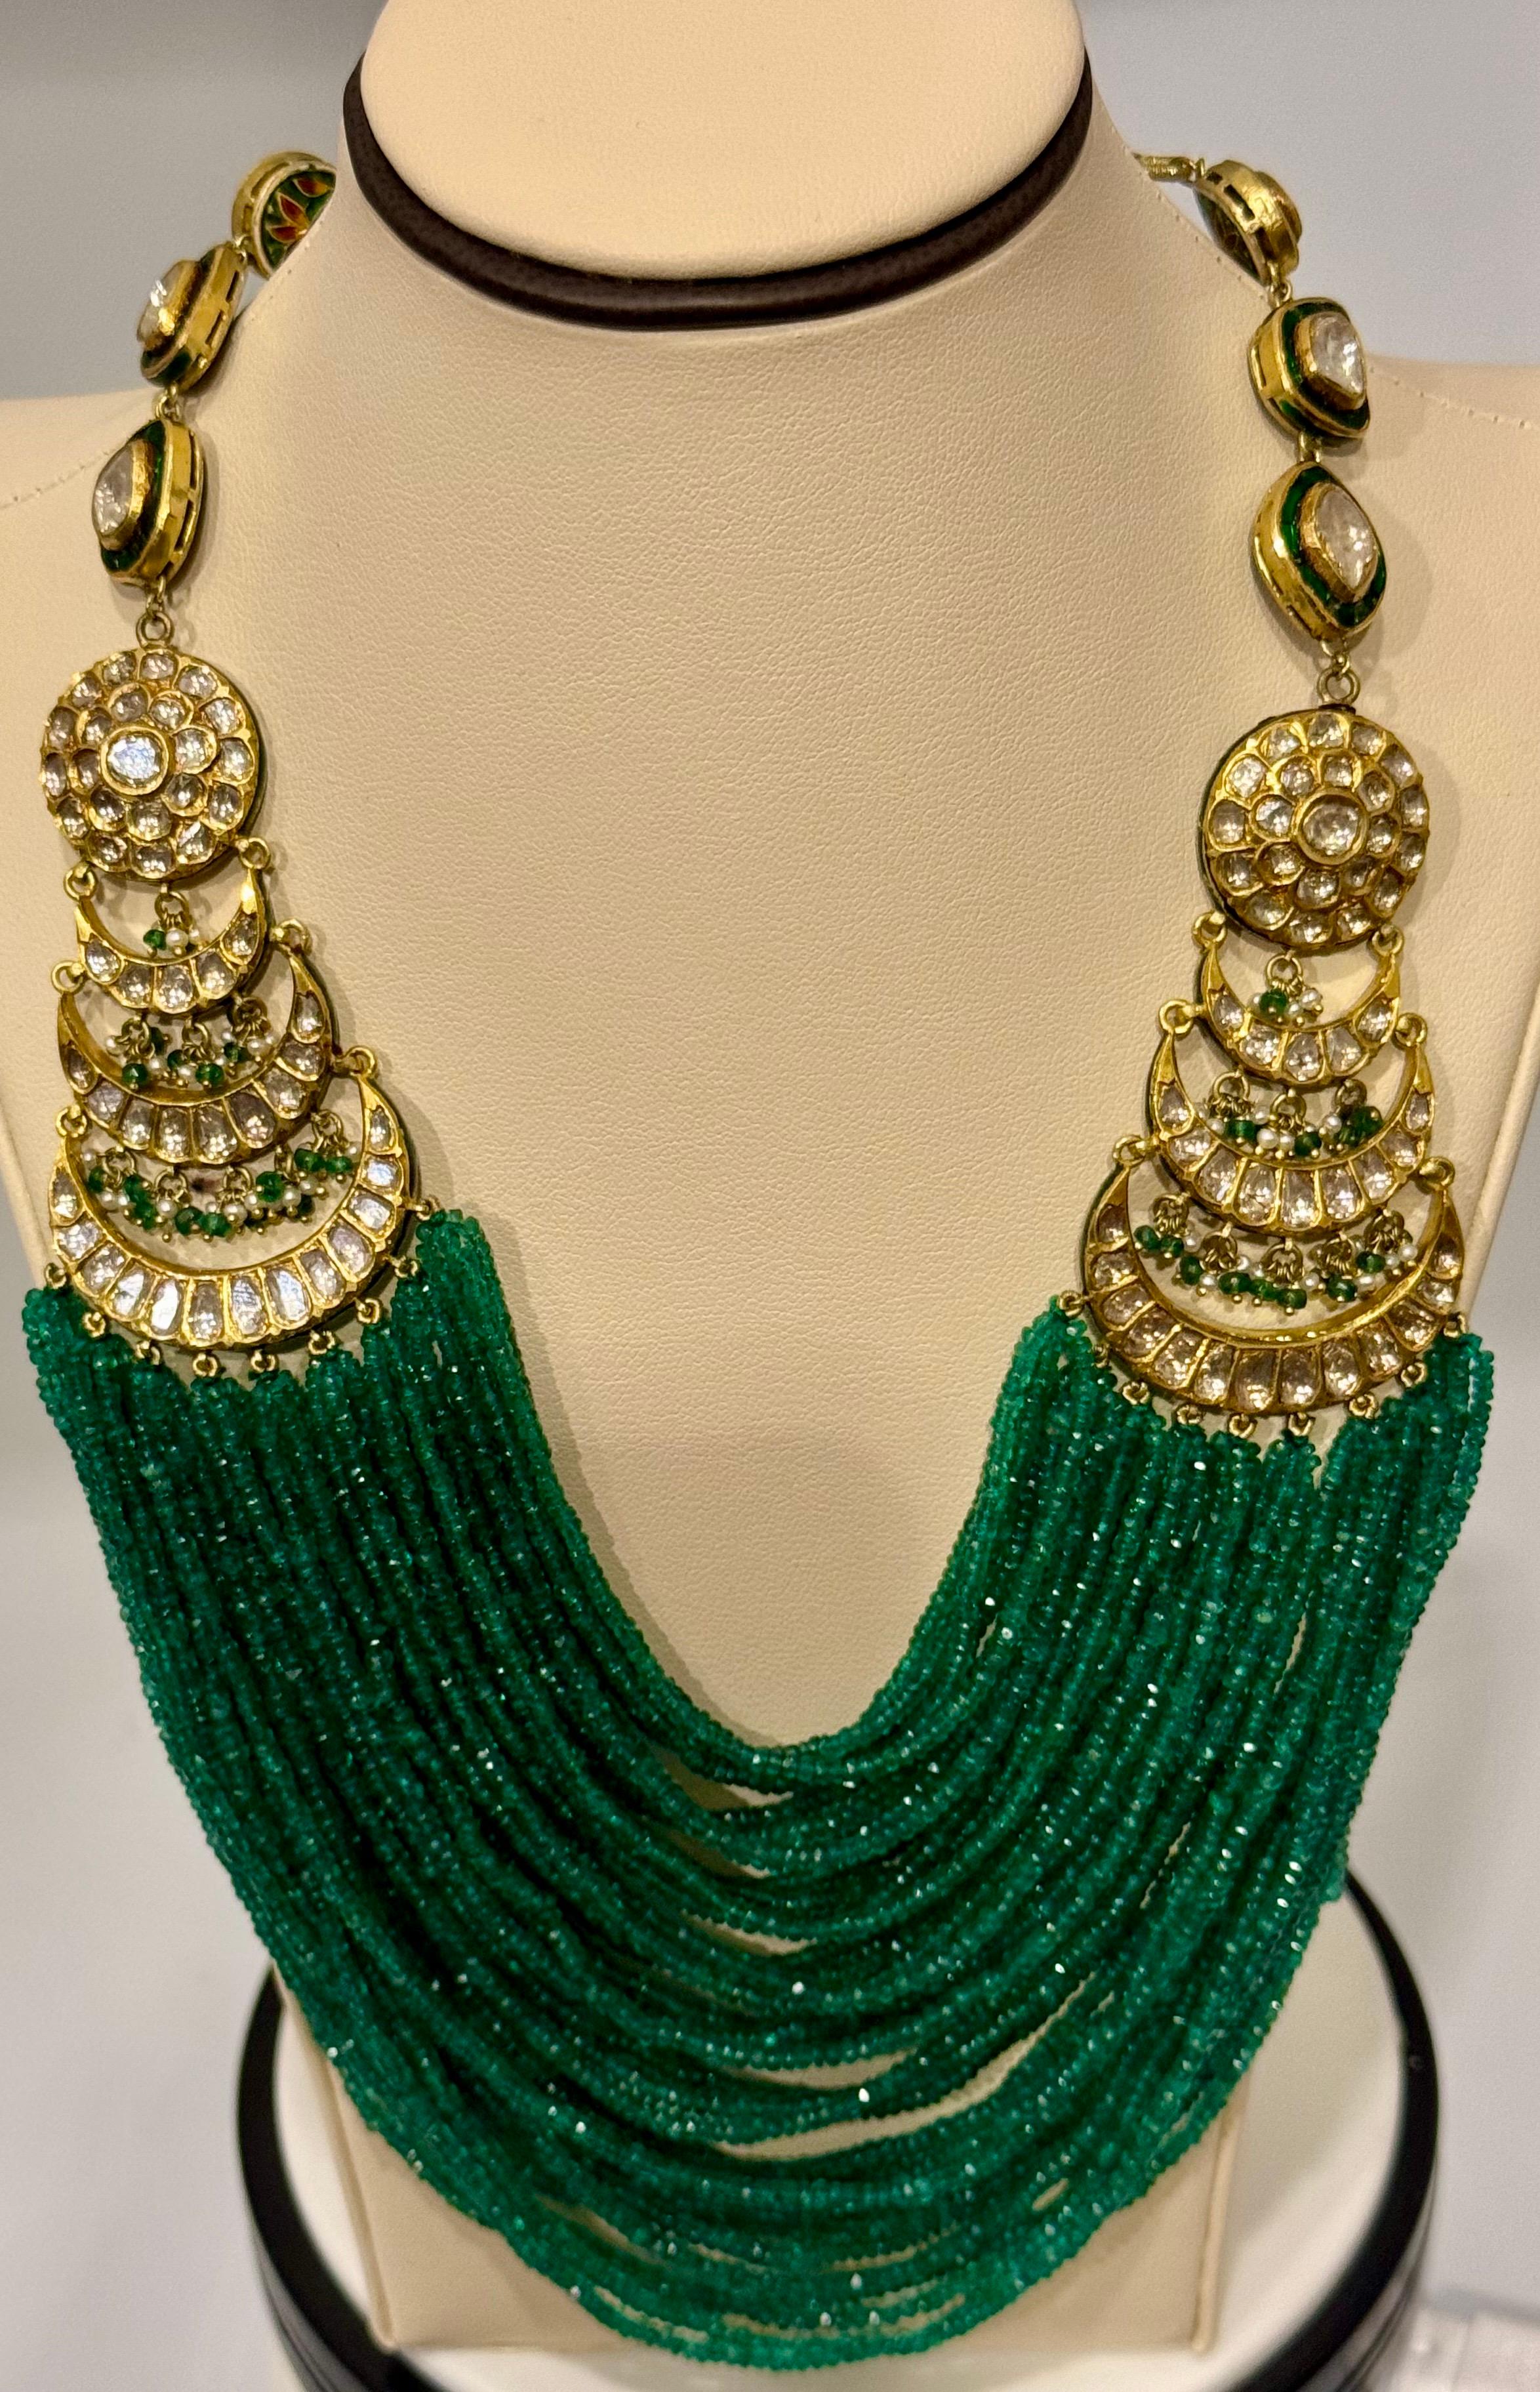 Mughal Magnificent Traditional multi-layer Emerald Bead Rose Cut Diamond Vintage Necklace with Zambian beads. Approximately 425 ct of natural emerald beads and rose cut diamonds approximately 6 ct. Jadau Traditional Kundan real Polki Rose Cut